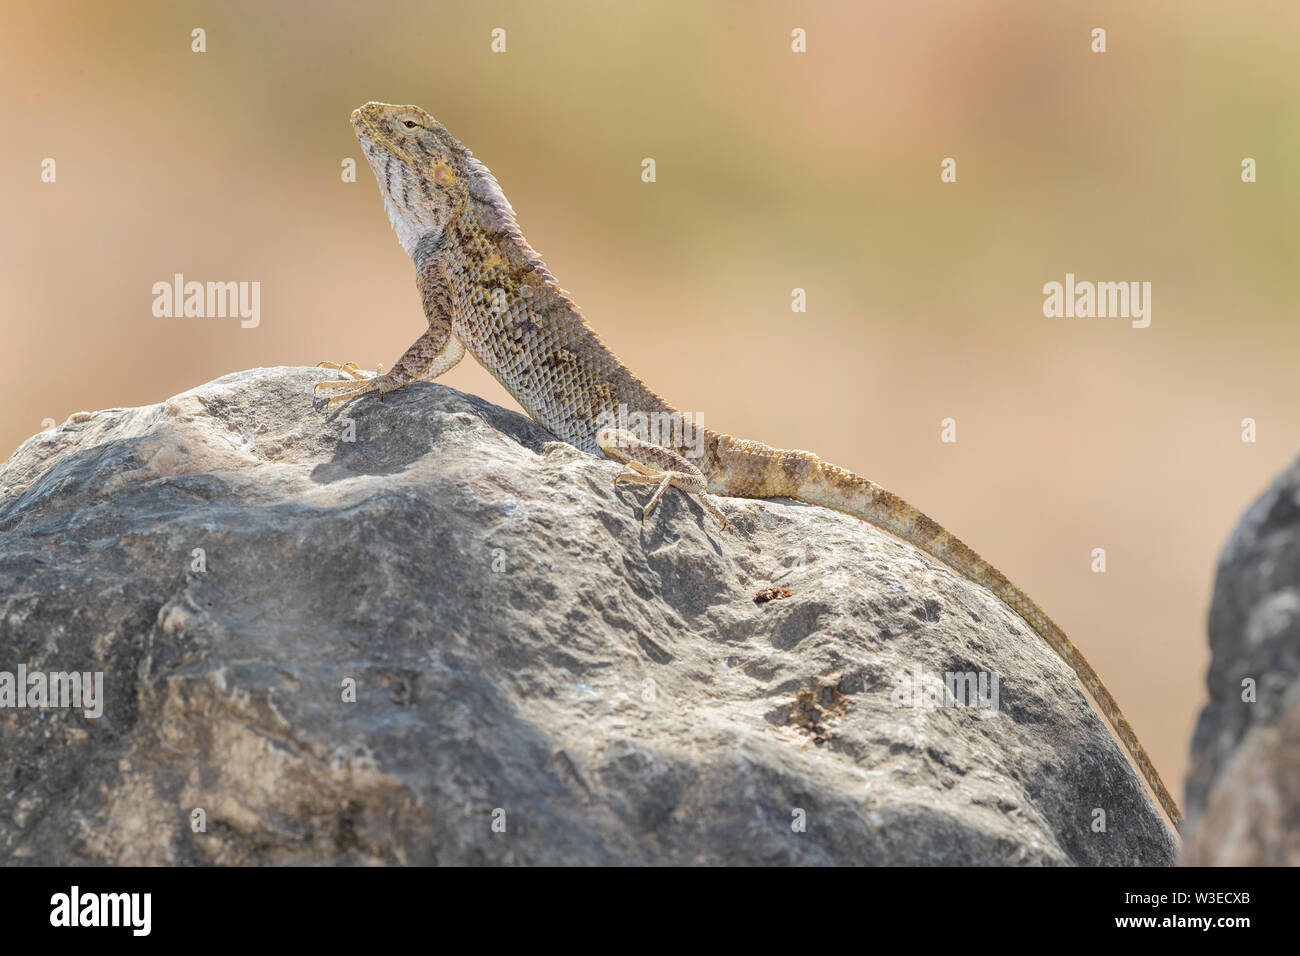 Yellow-spotted Agama (Trapelus flavimaculatus), sida view of an individual standing on a rock, Dhofar, Oman Stock Photo